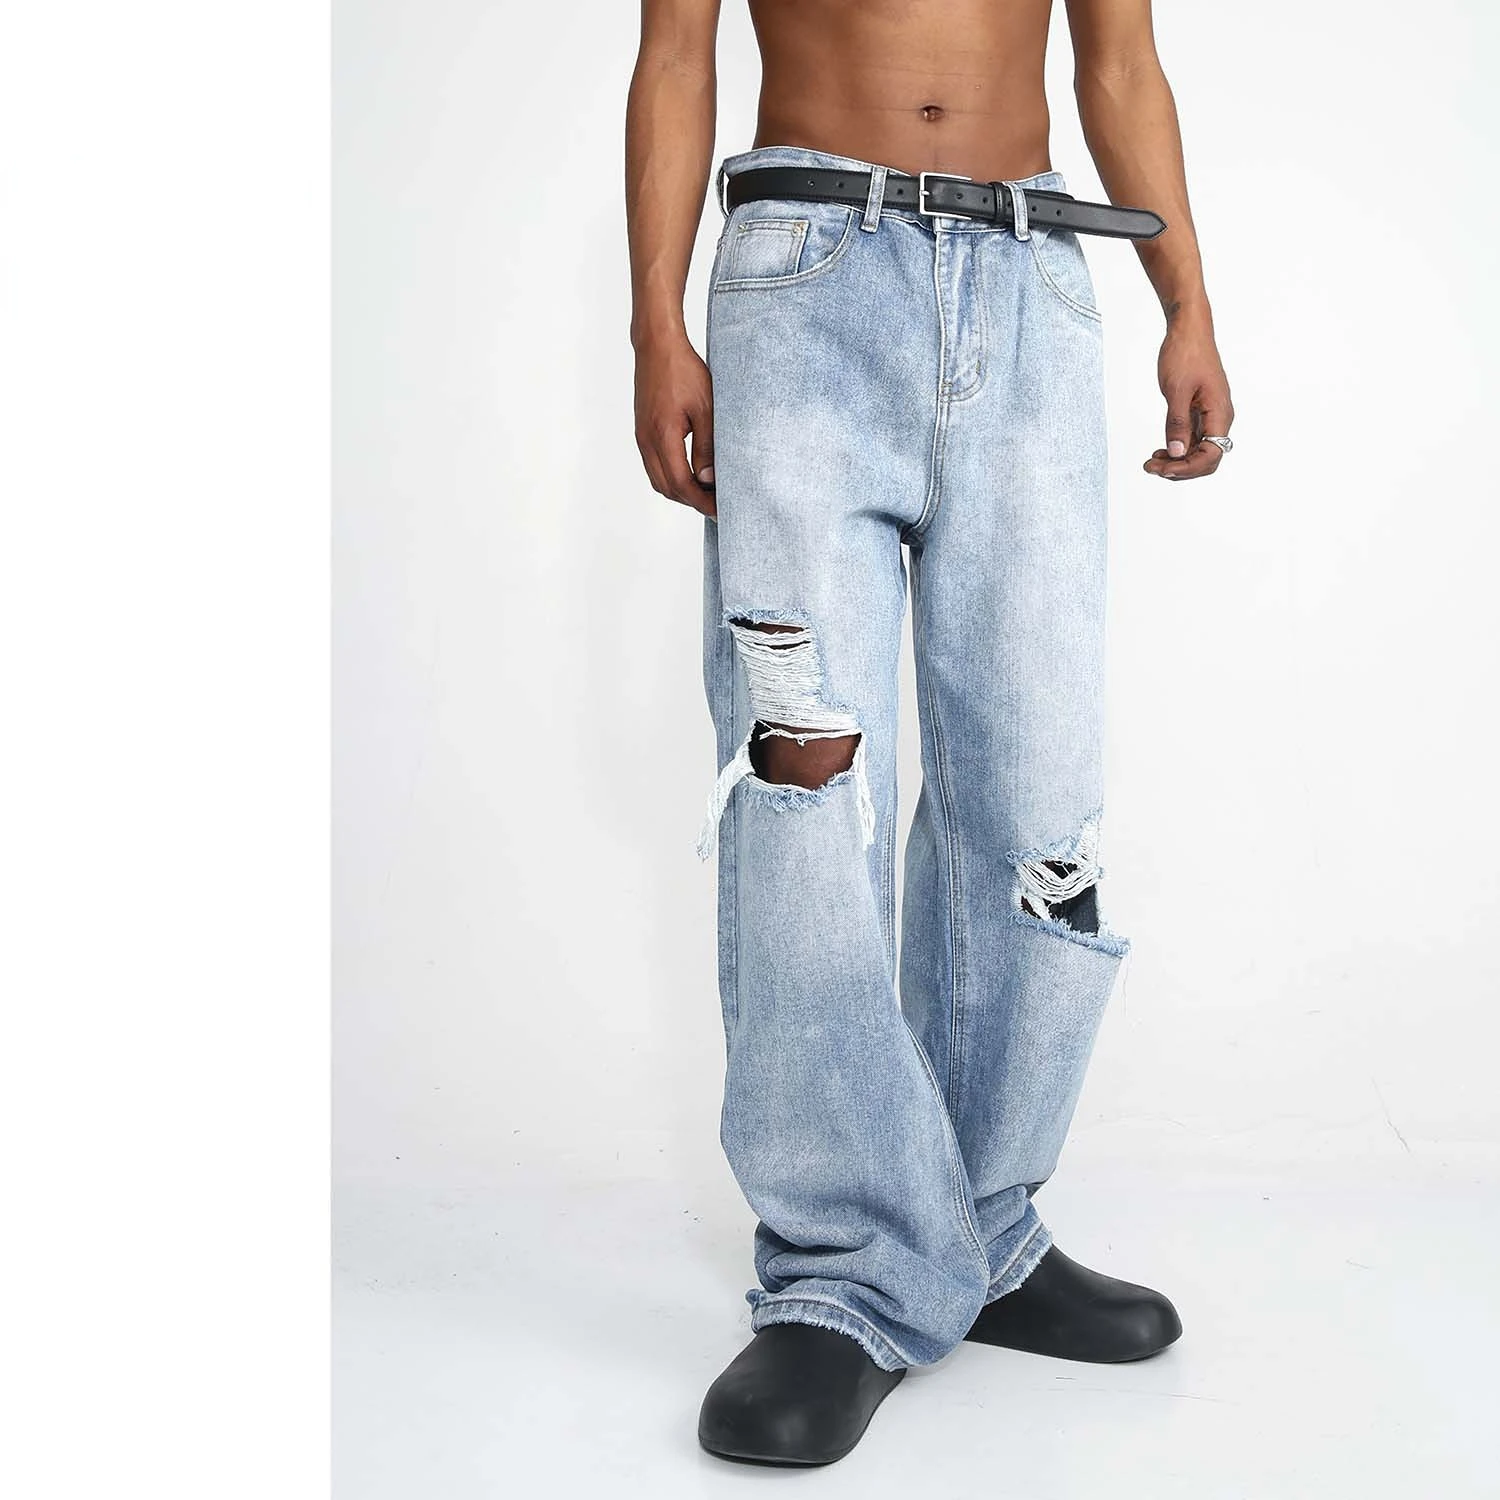 

Men's Fashion Destroyed Jeans Pants Loose Fit Y2K Ripped Denim Trousers Washed Blue Big Holes Vibe Style Cowboy Bottoms